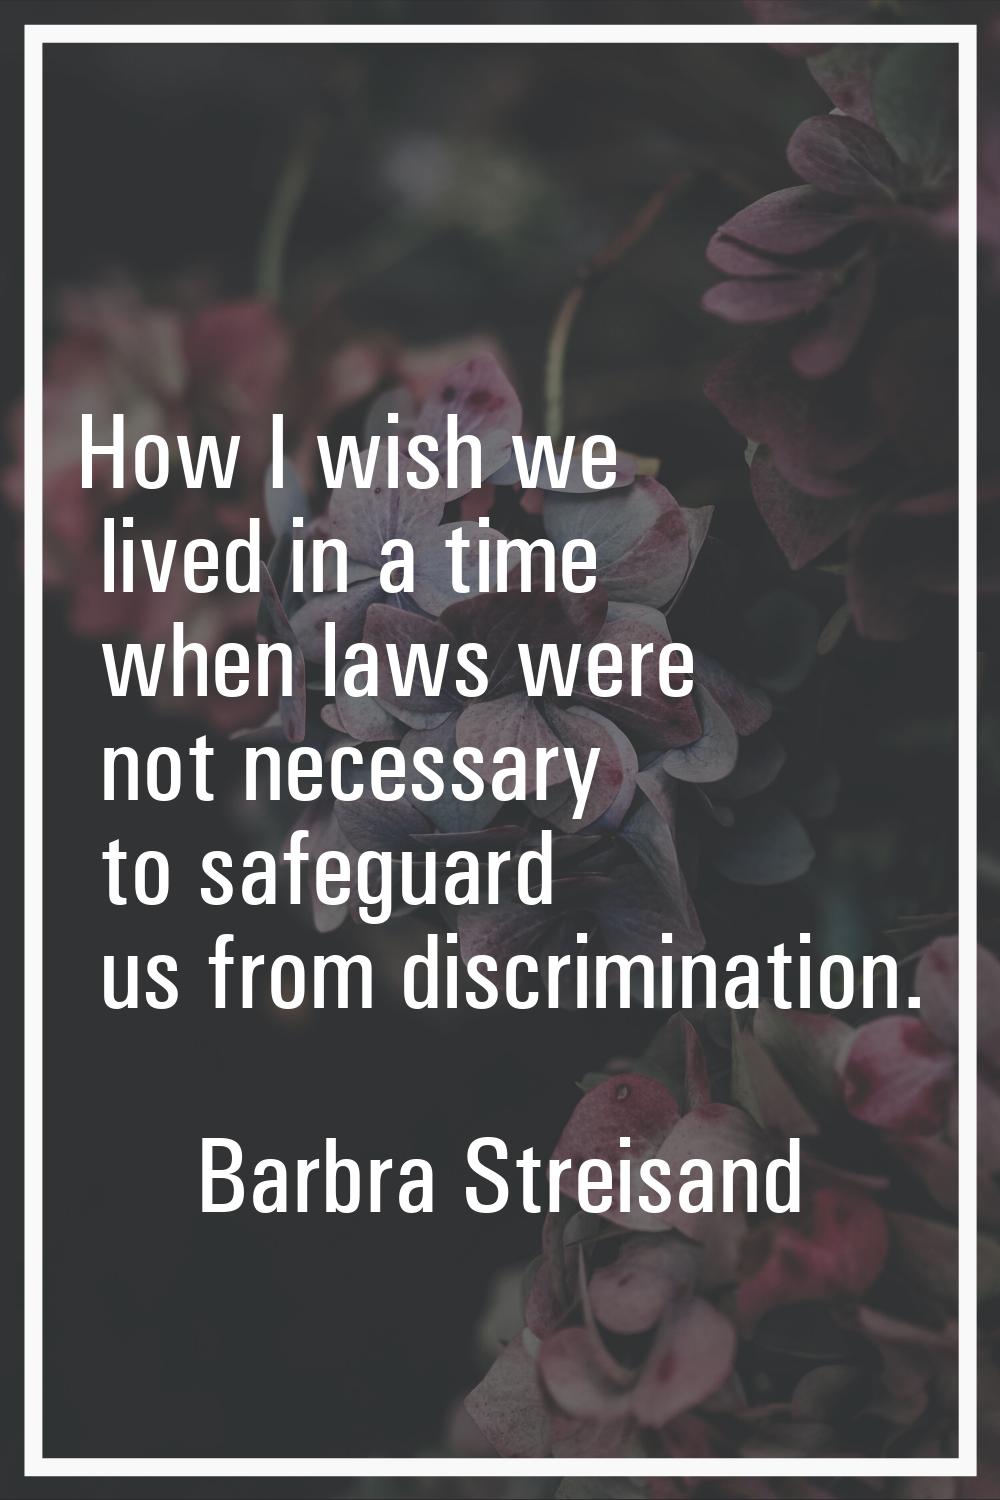 How I wish we lived in a time when laws were not necessary to safeguard us from discrimination.